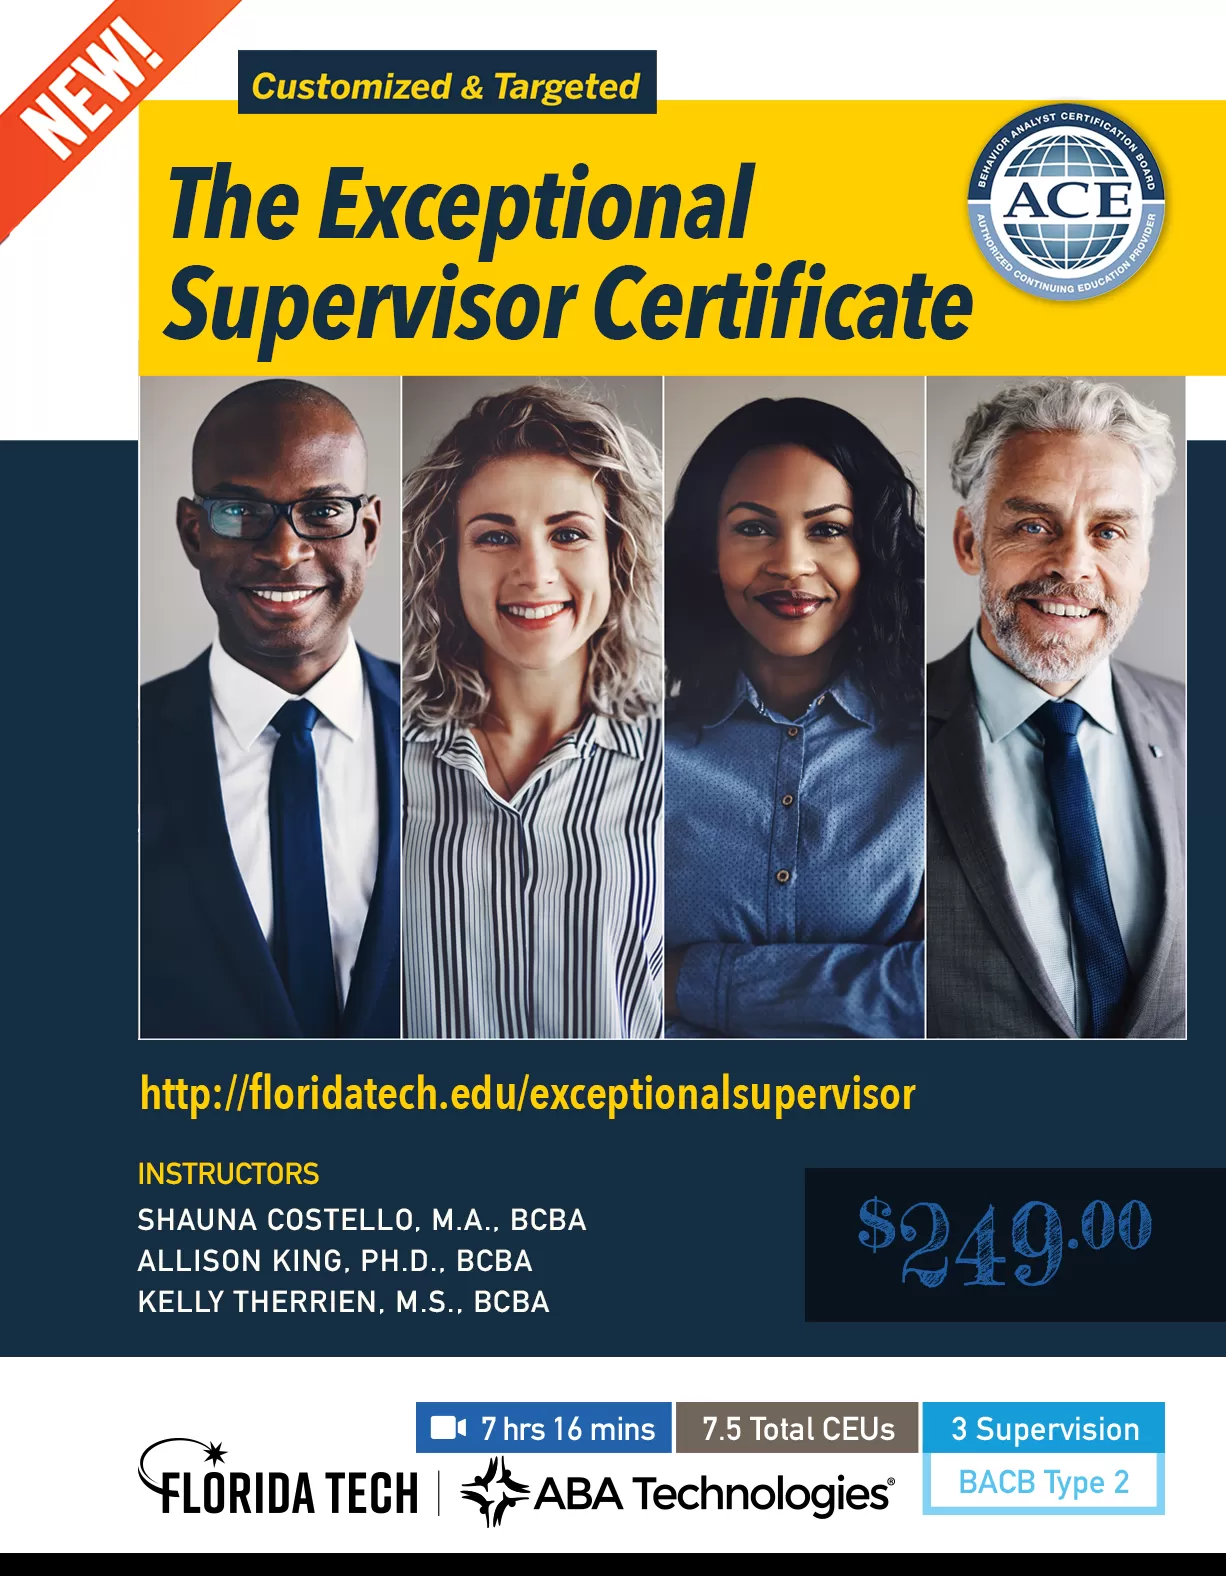 The Exceptional Supervisor Certificate